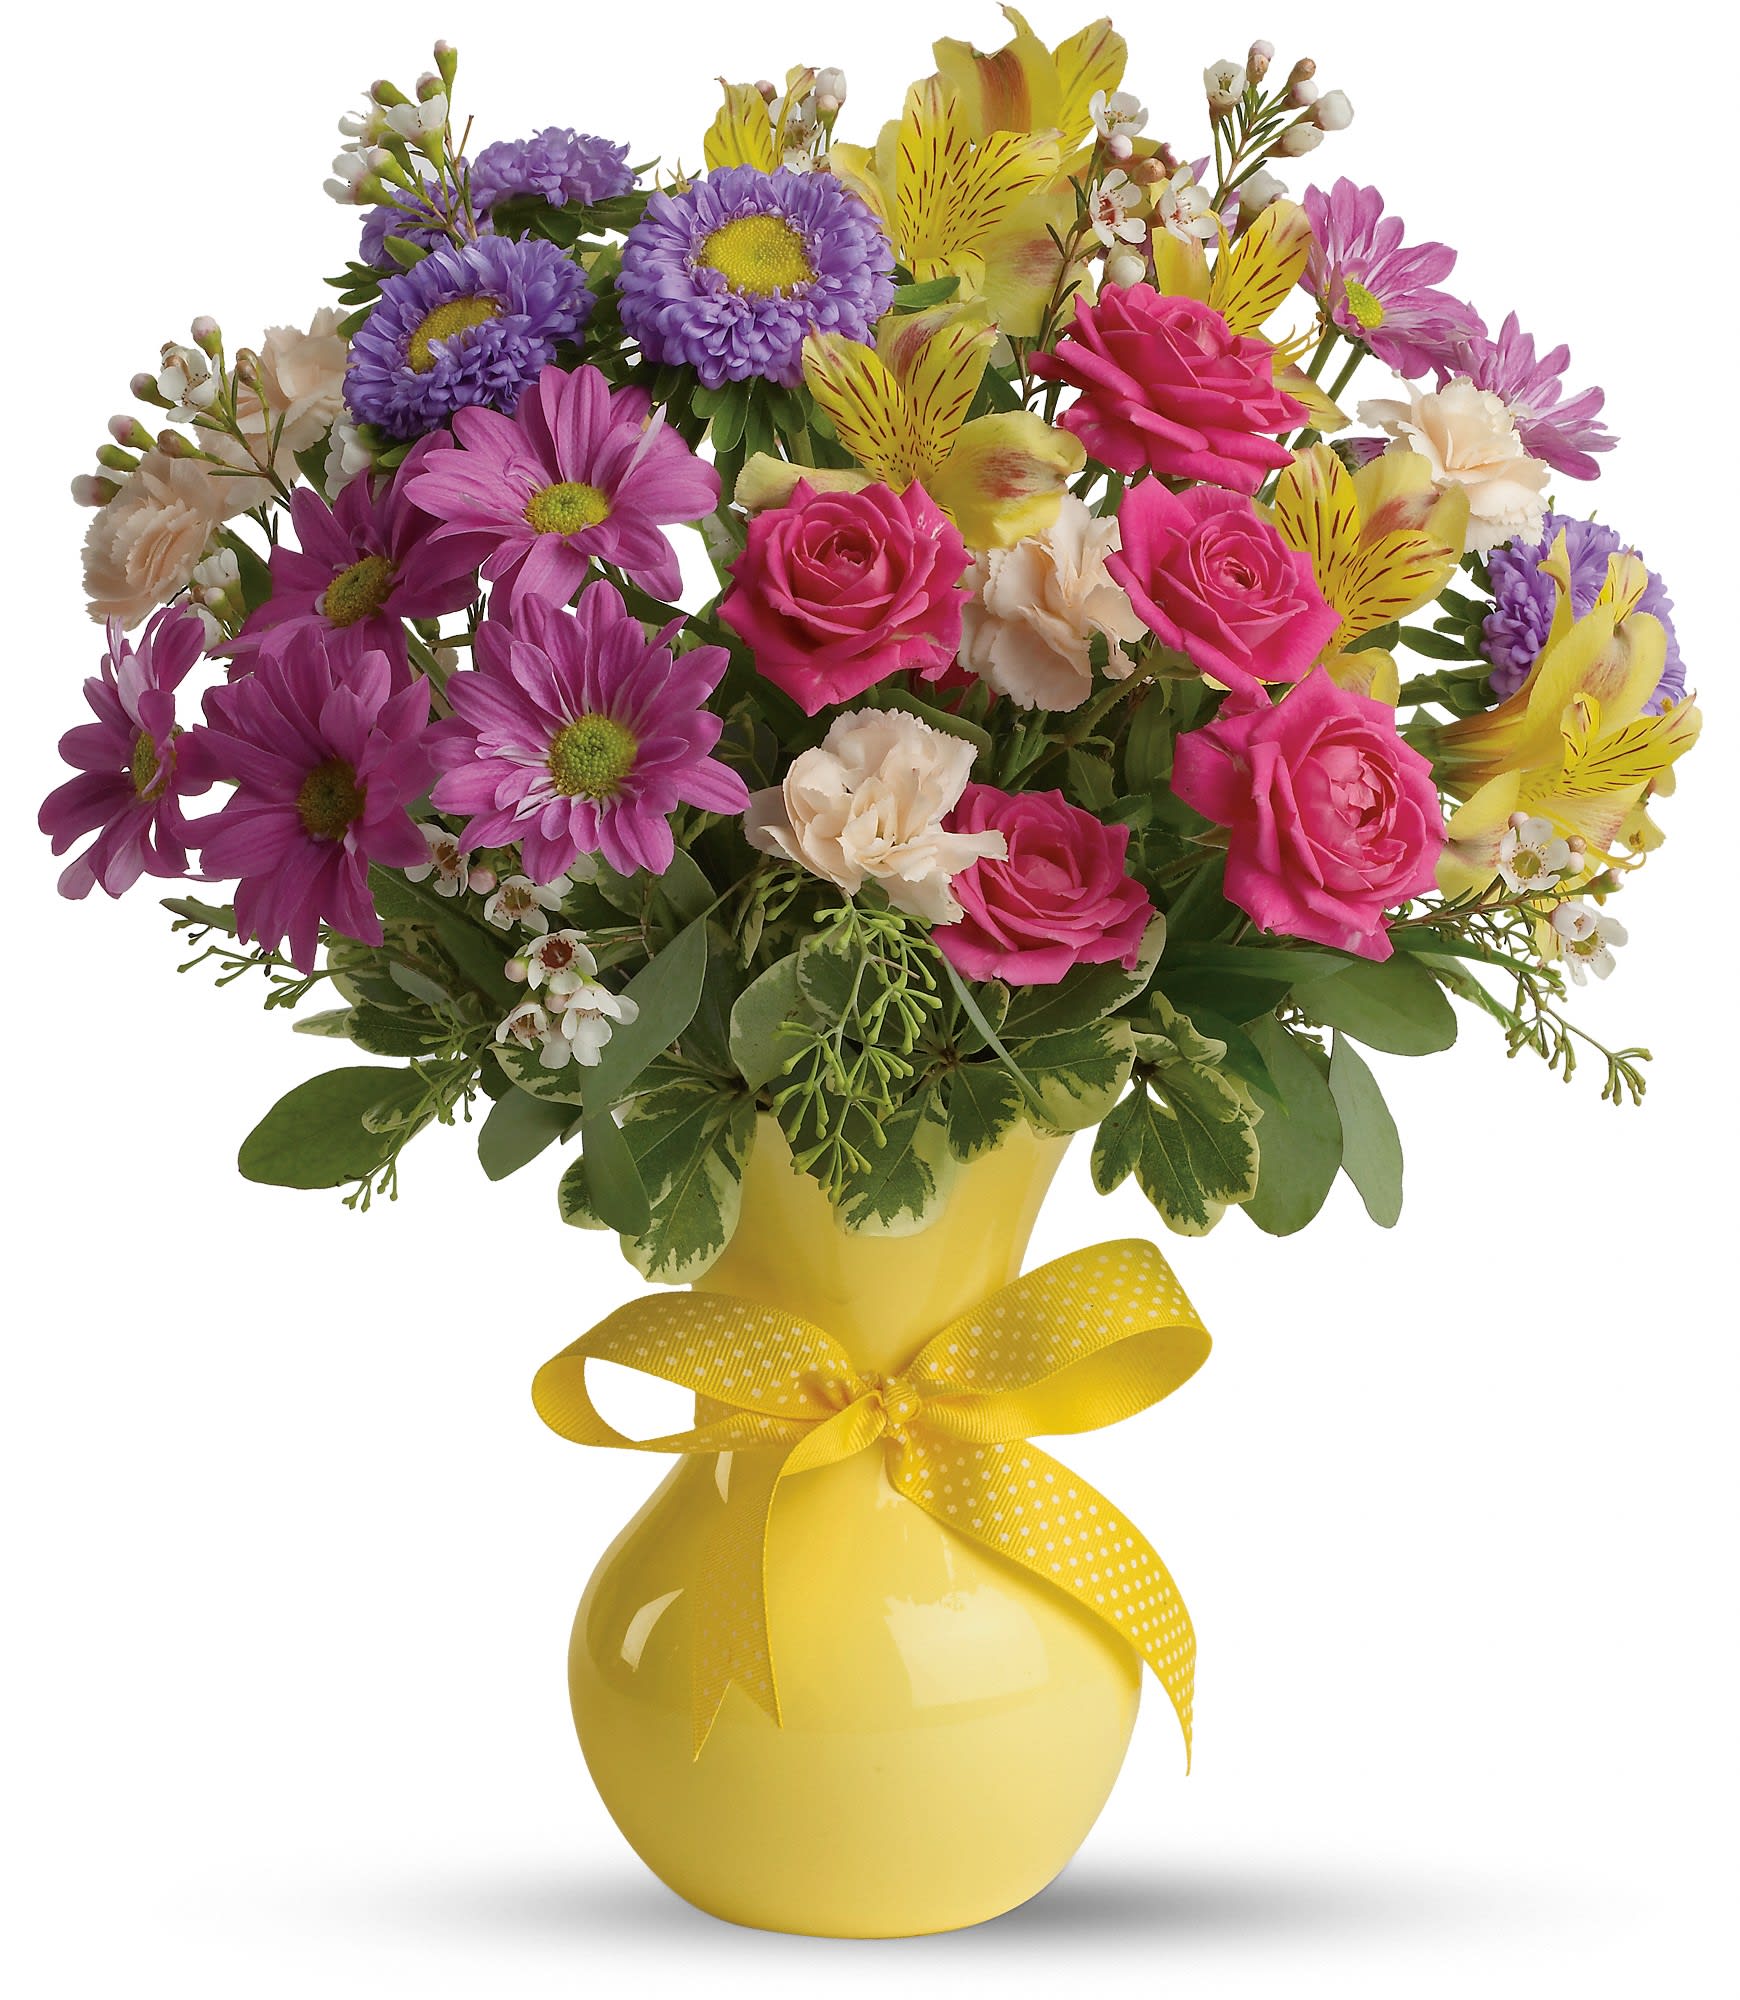 Color It Happy  - Whichever season of the year, this charming bouquet is like a breath of spring. A gorgeous multicolored bouquet in a yellow vase tied with a yellow ribbon - couldn't be springier! 